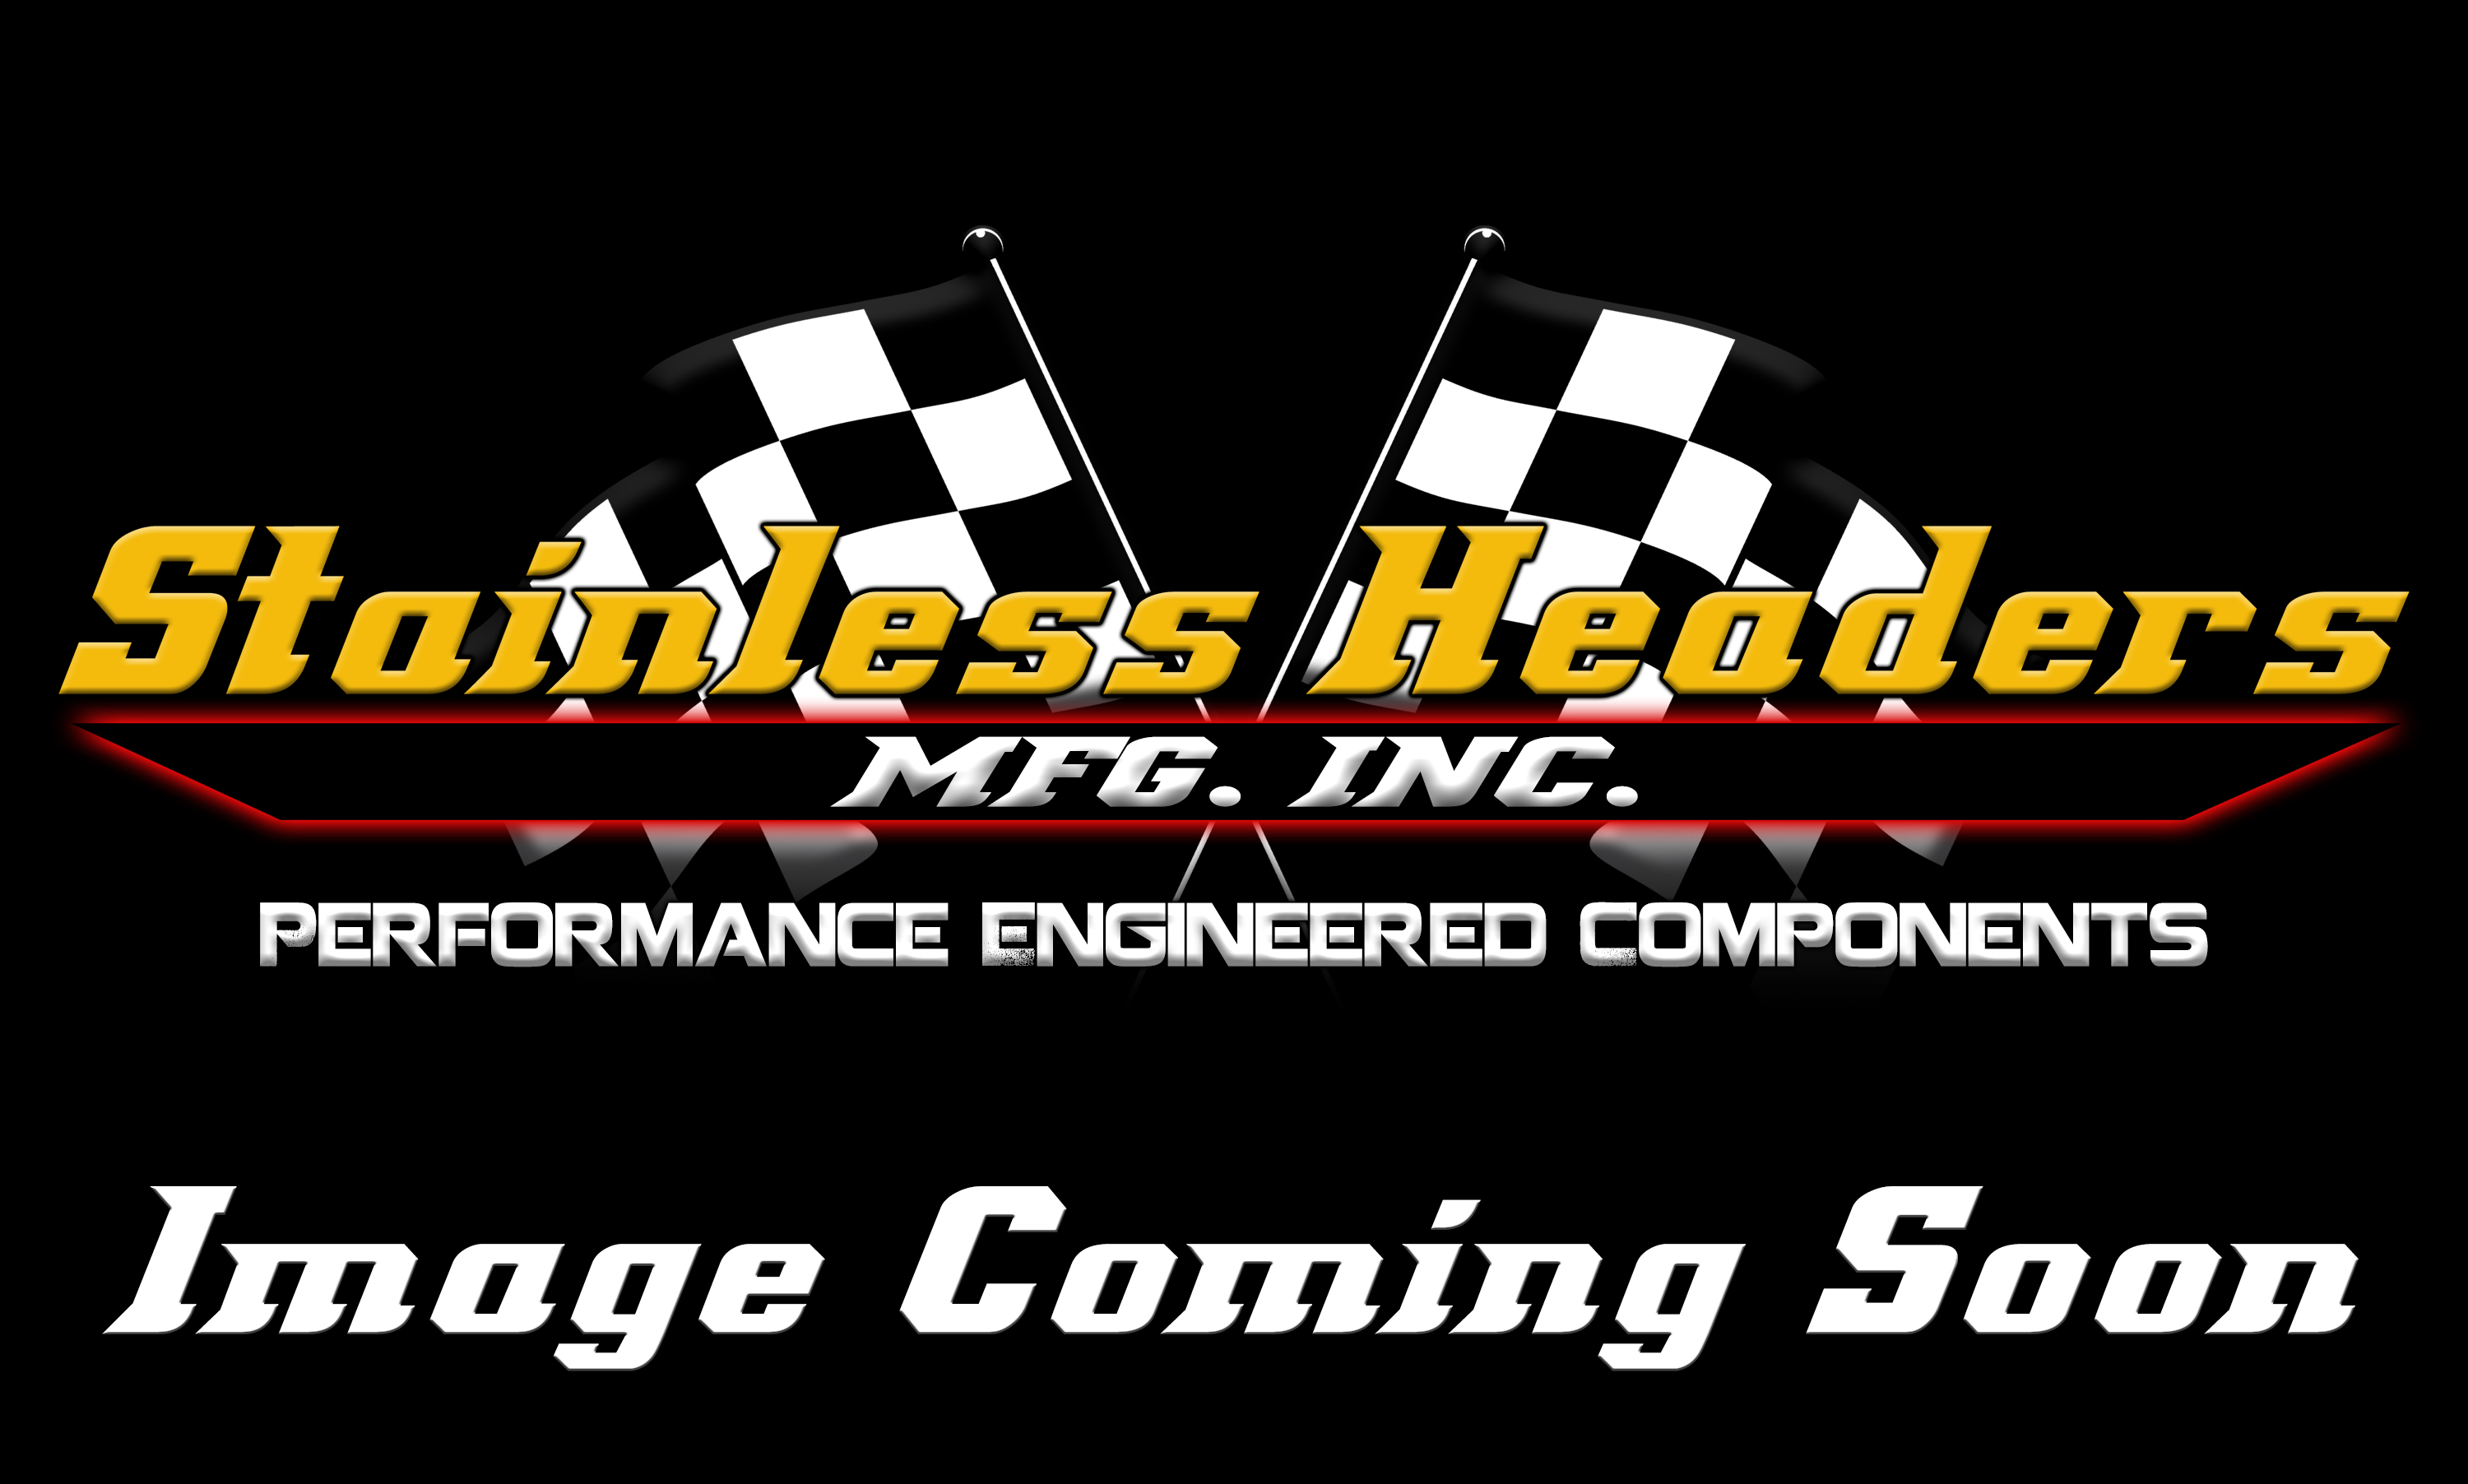 Stainless Headers - 2 1/4" Primary 4 into 1 Performance Merge Collector-16ga 304ss - Image 1